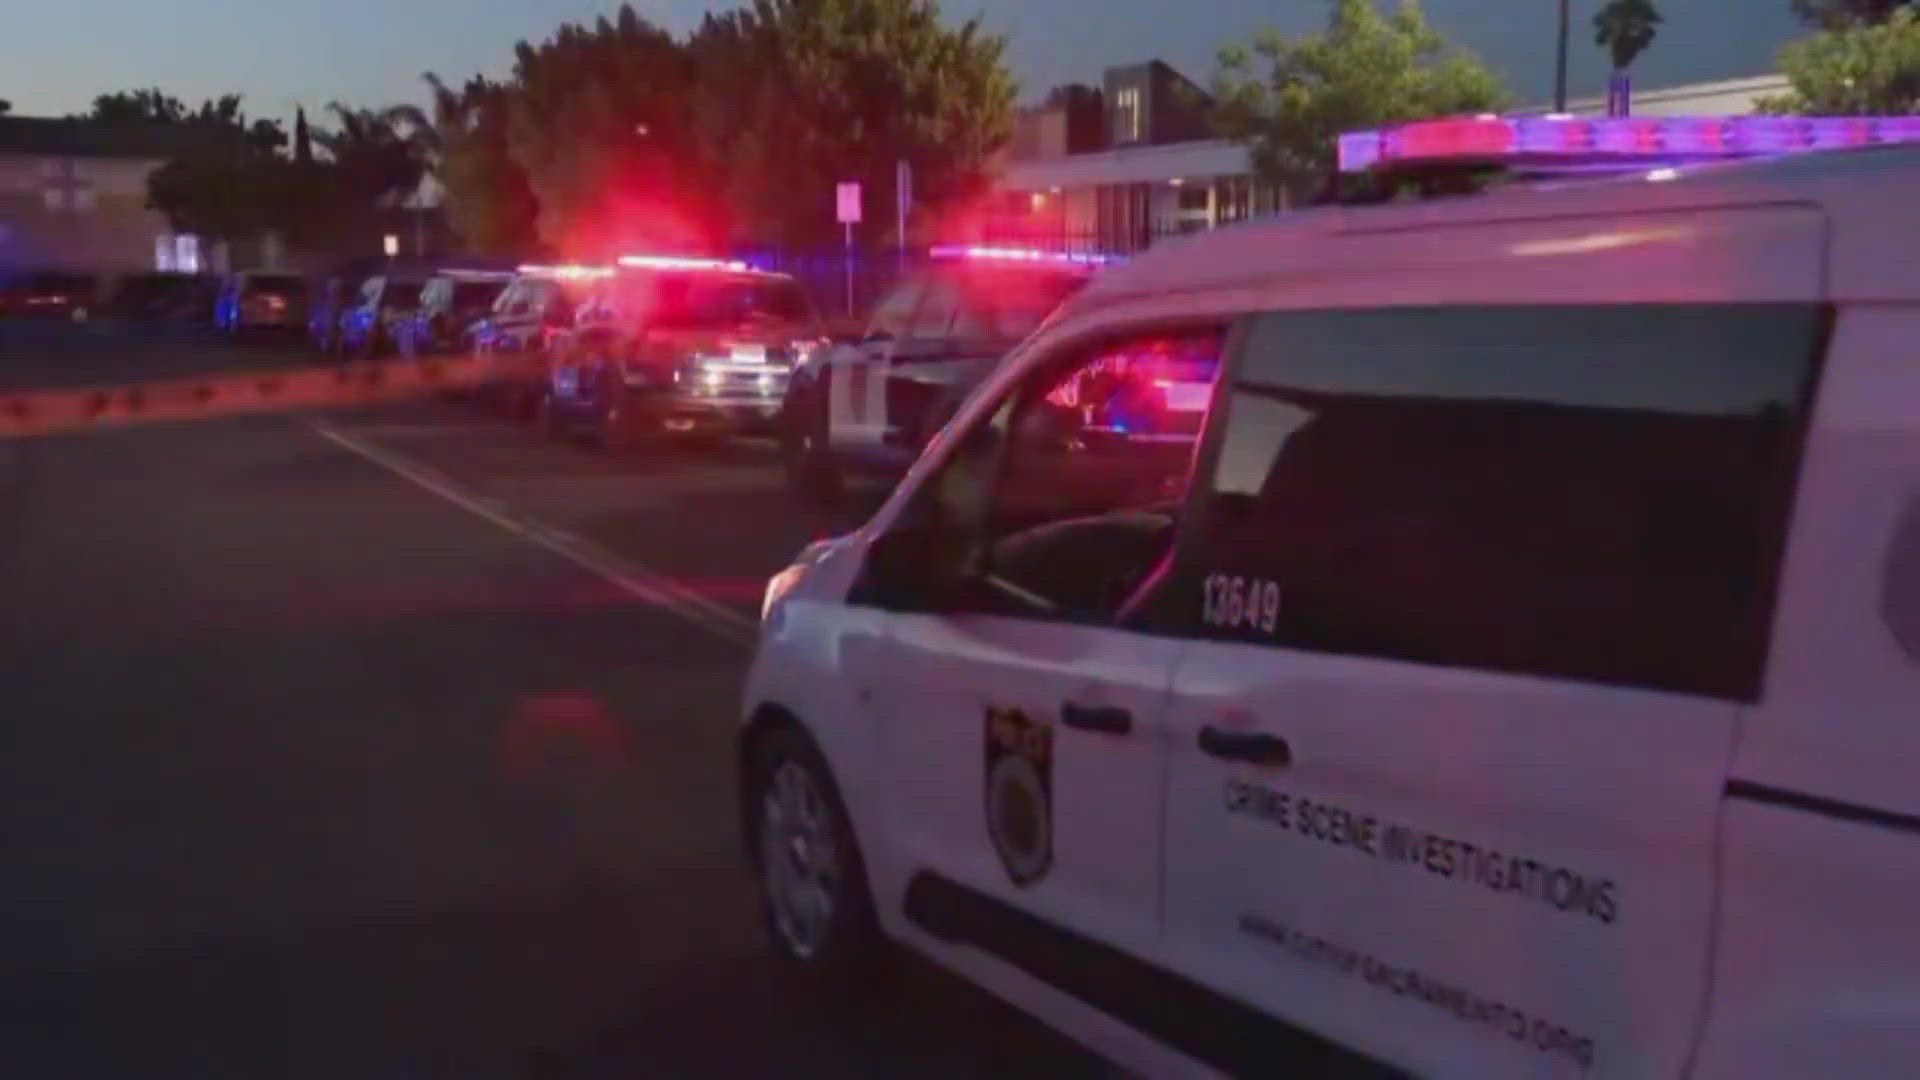 All five people are expected to survive their wounds, according to Sacramento police.